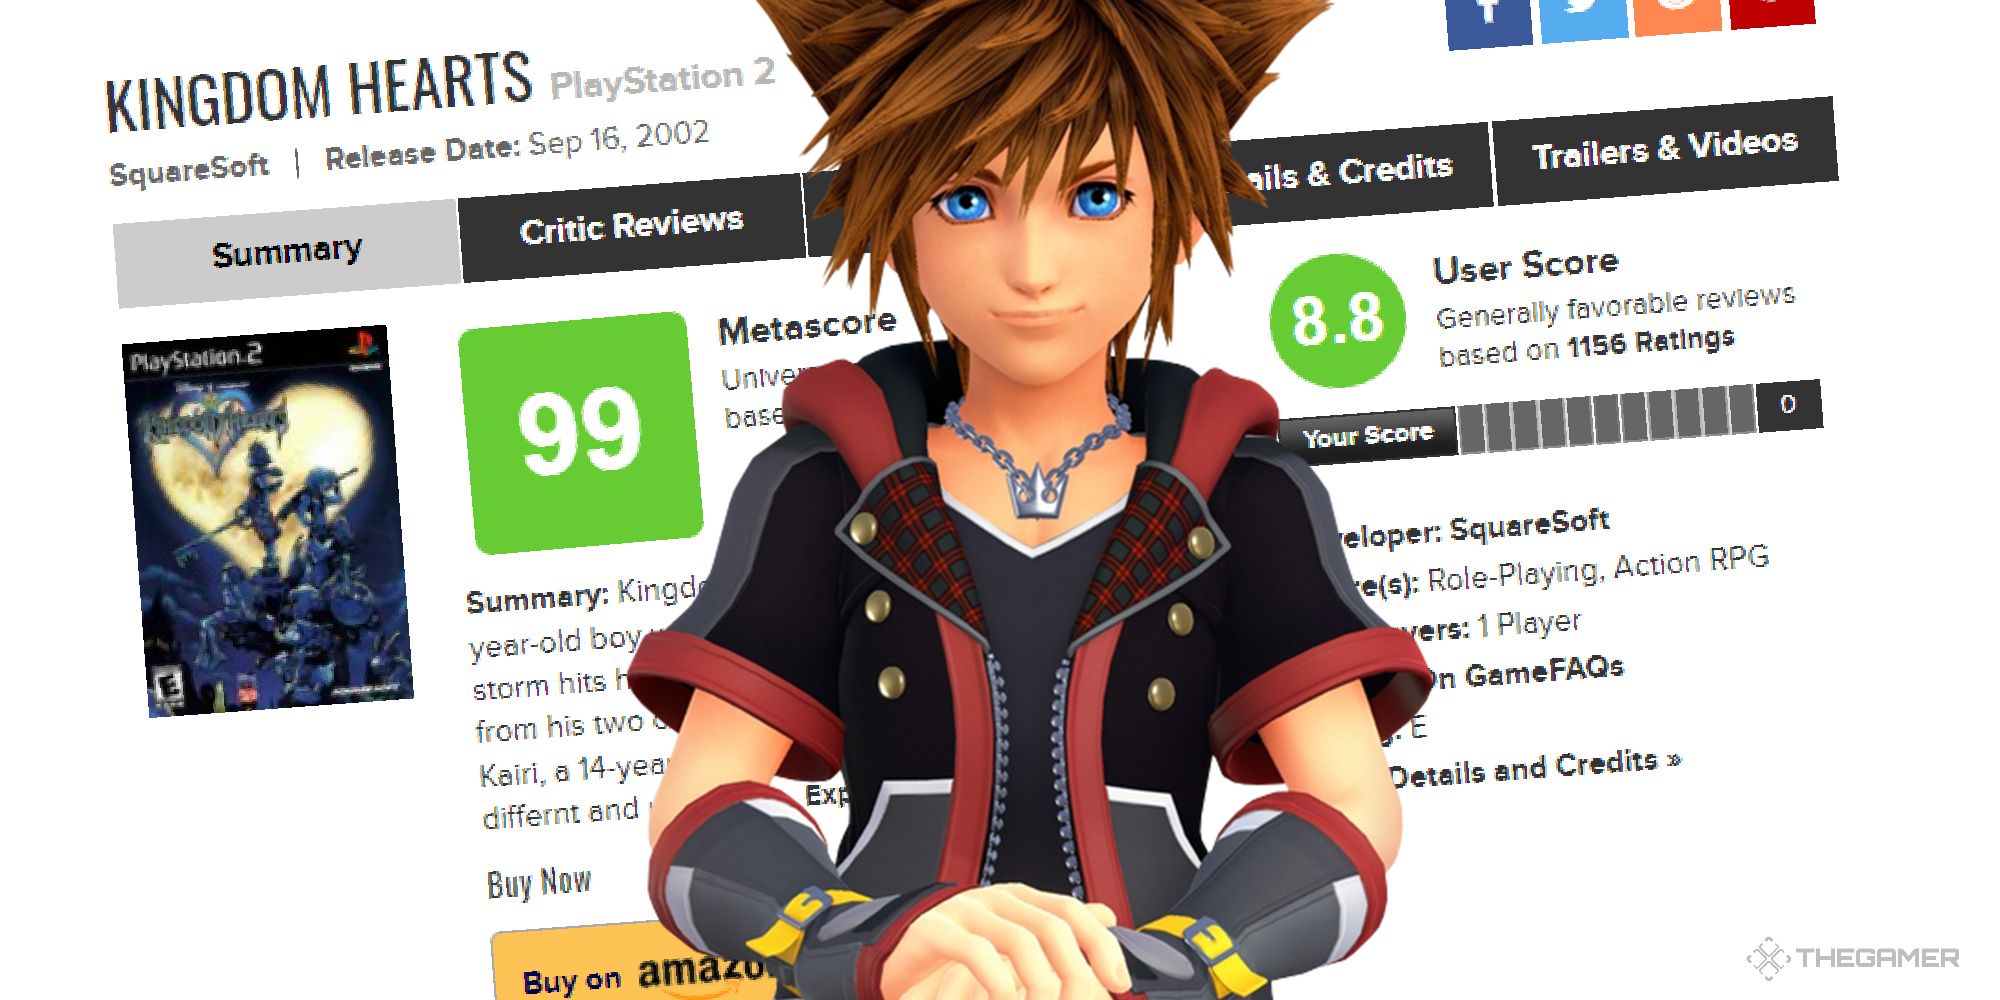 kingdom hearts with a perfect metacritic score